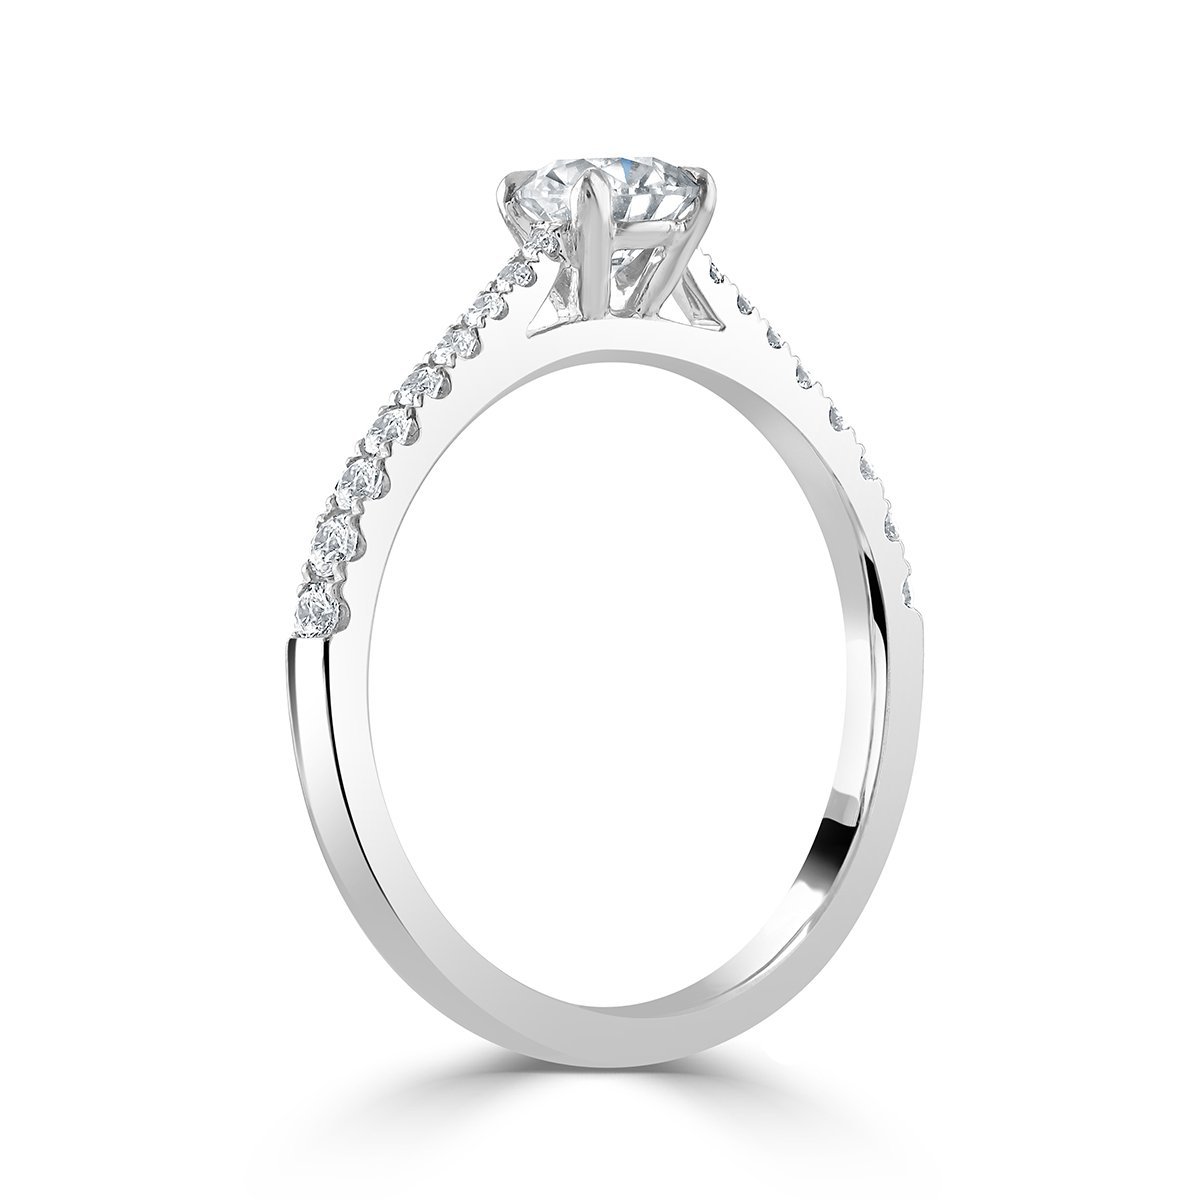 Round Brilliant Cut Ring with Diamond Set Shoulders